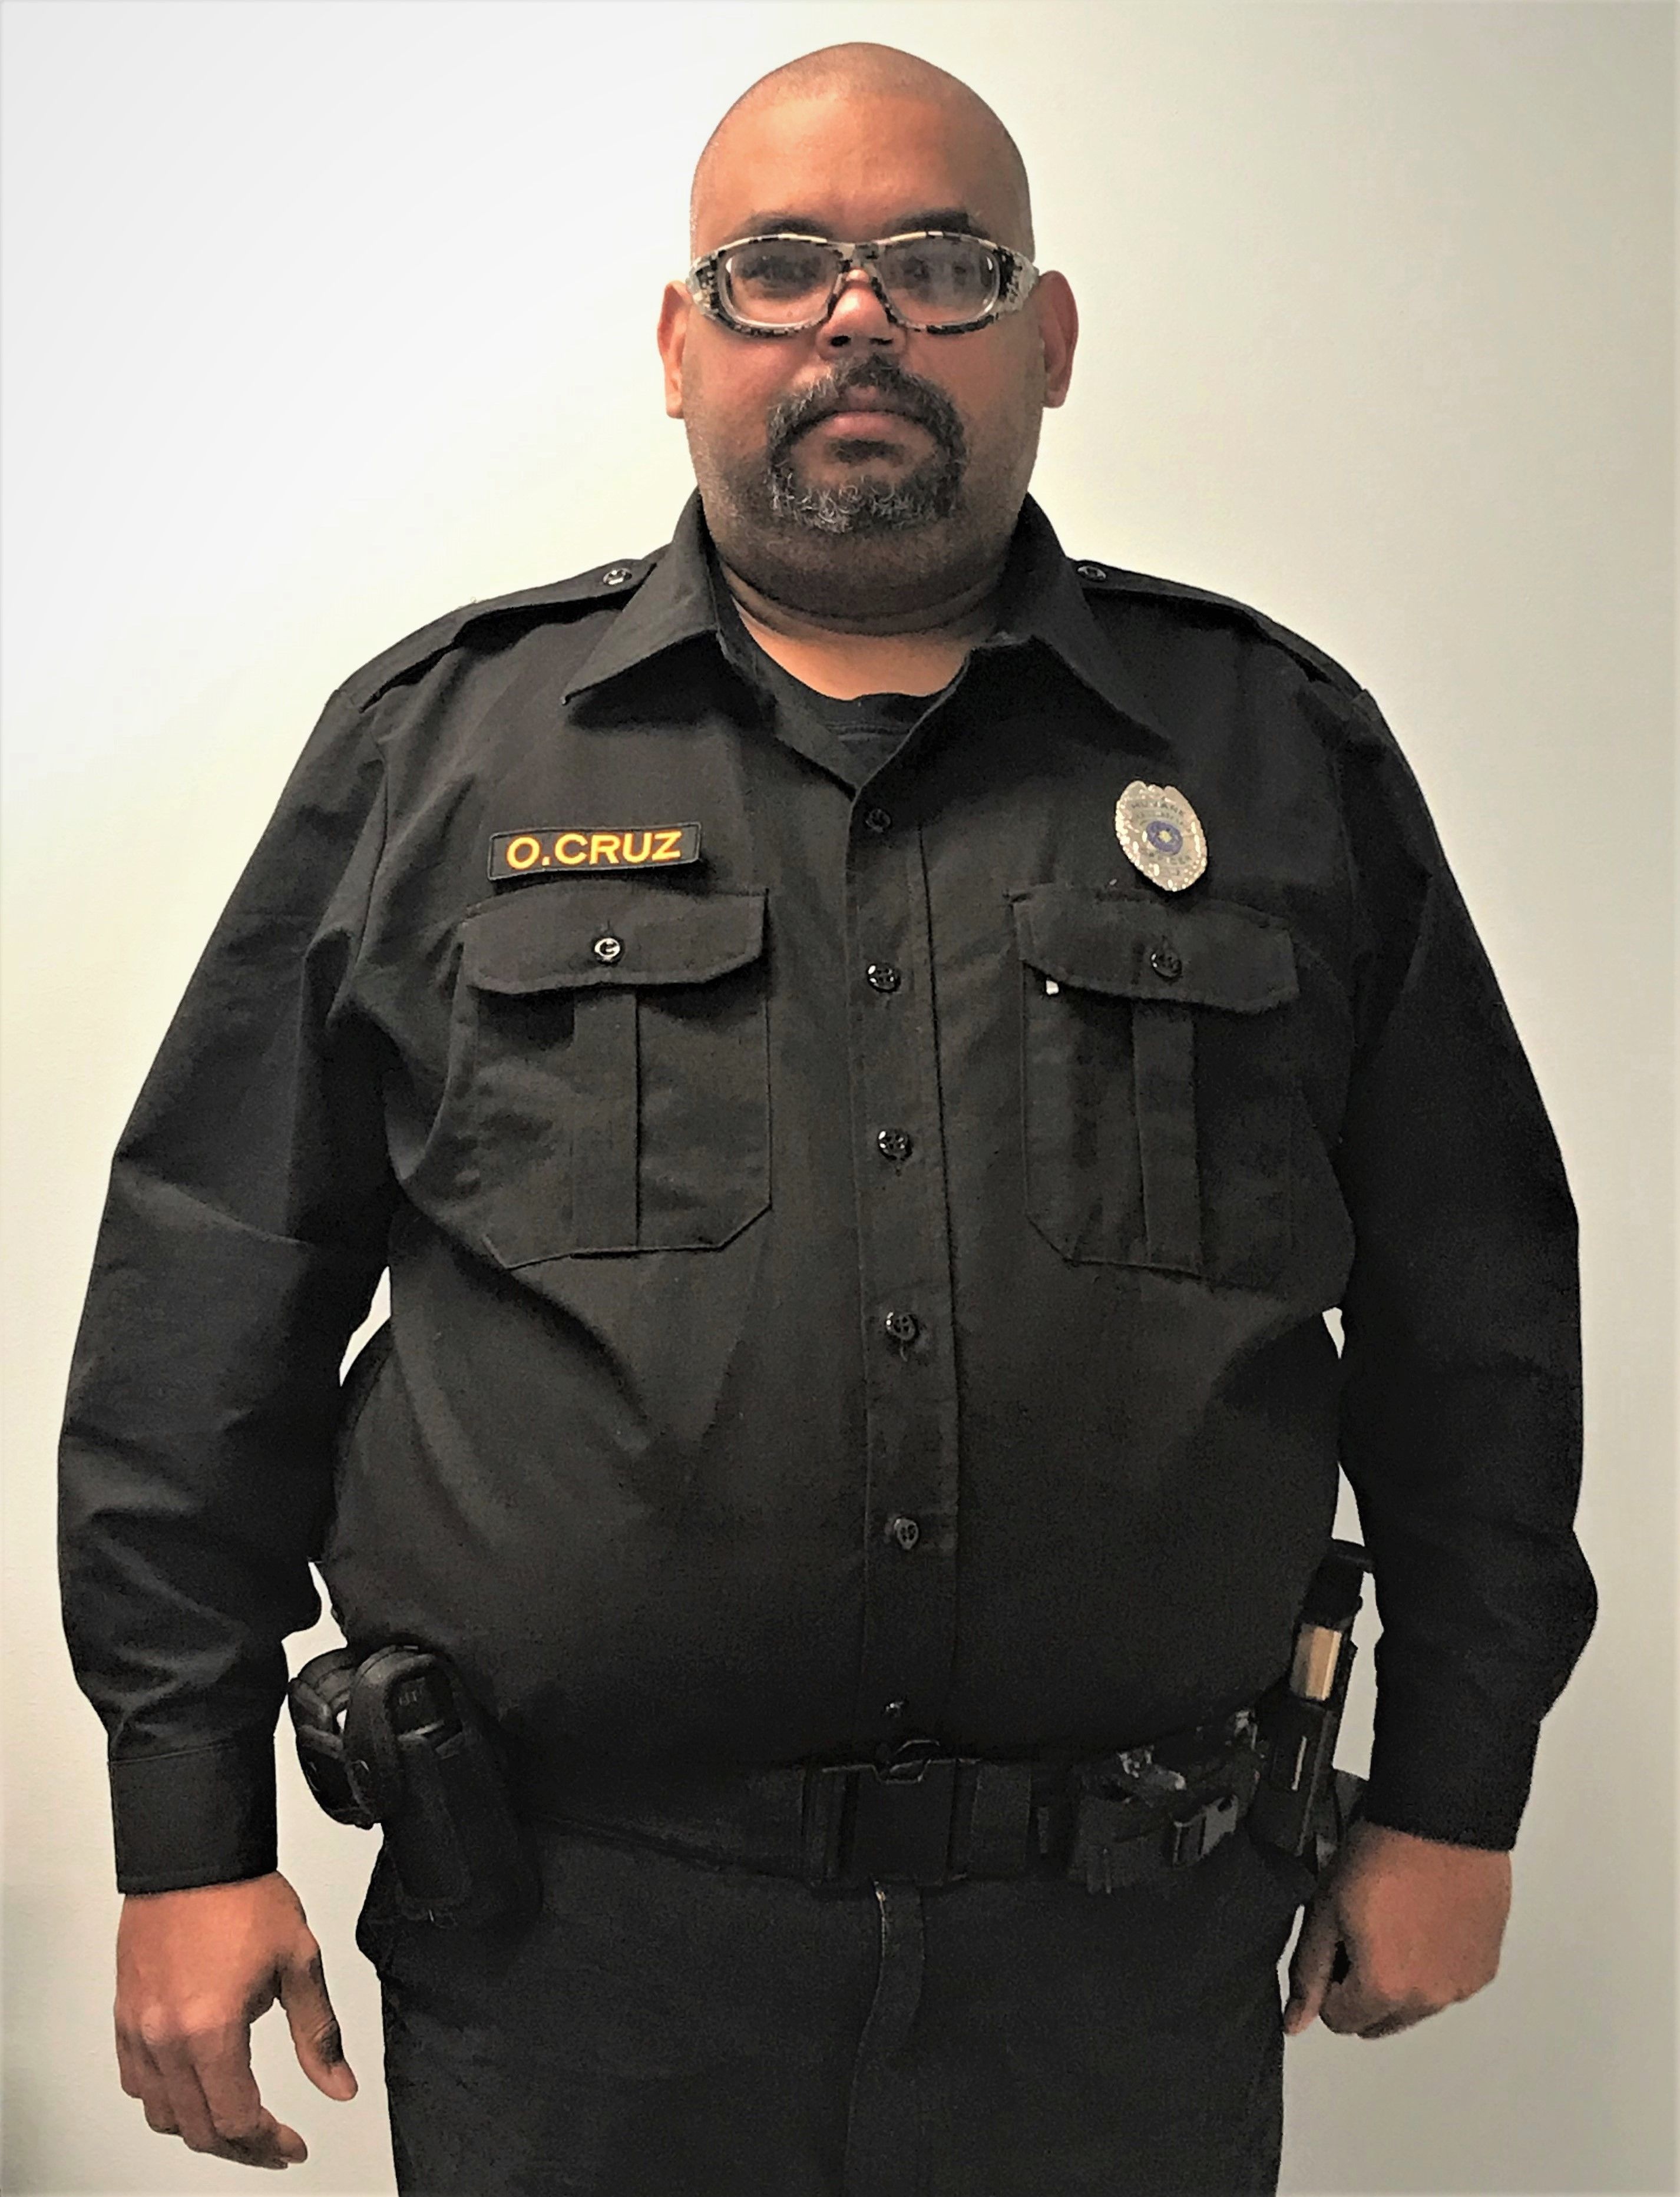 Otto Cruz Sworn in as Humane Society Police Officer for the YCSPCA